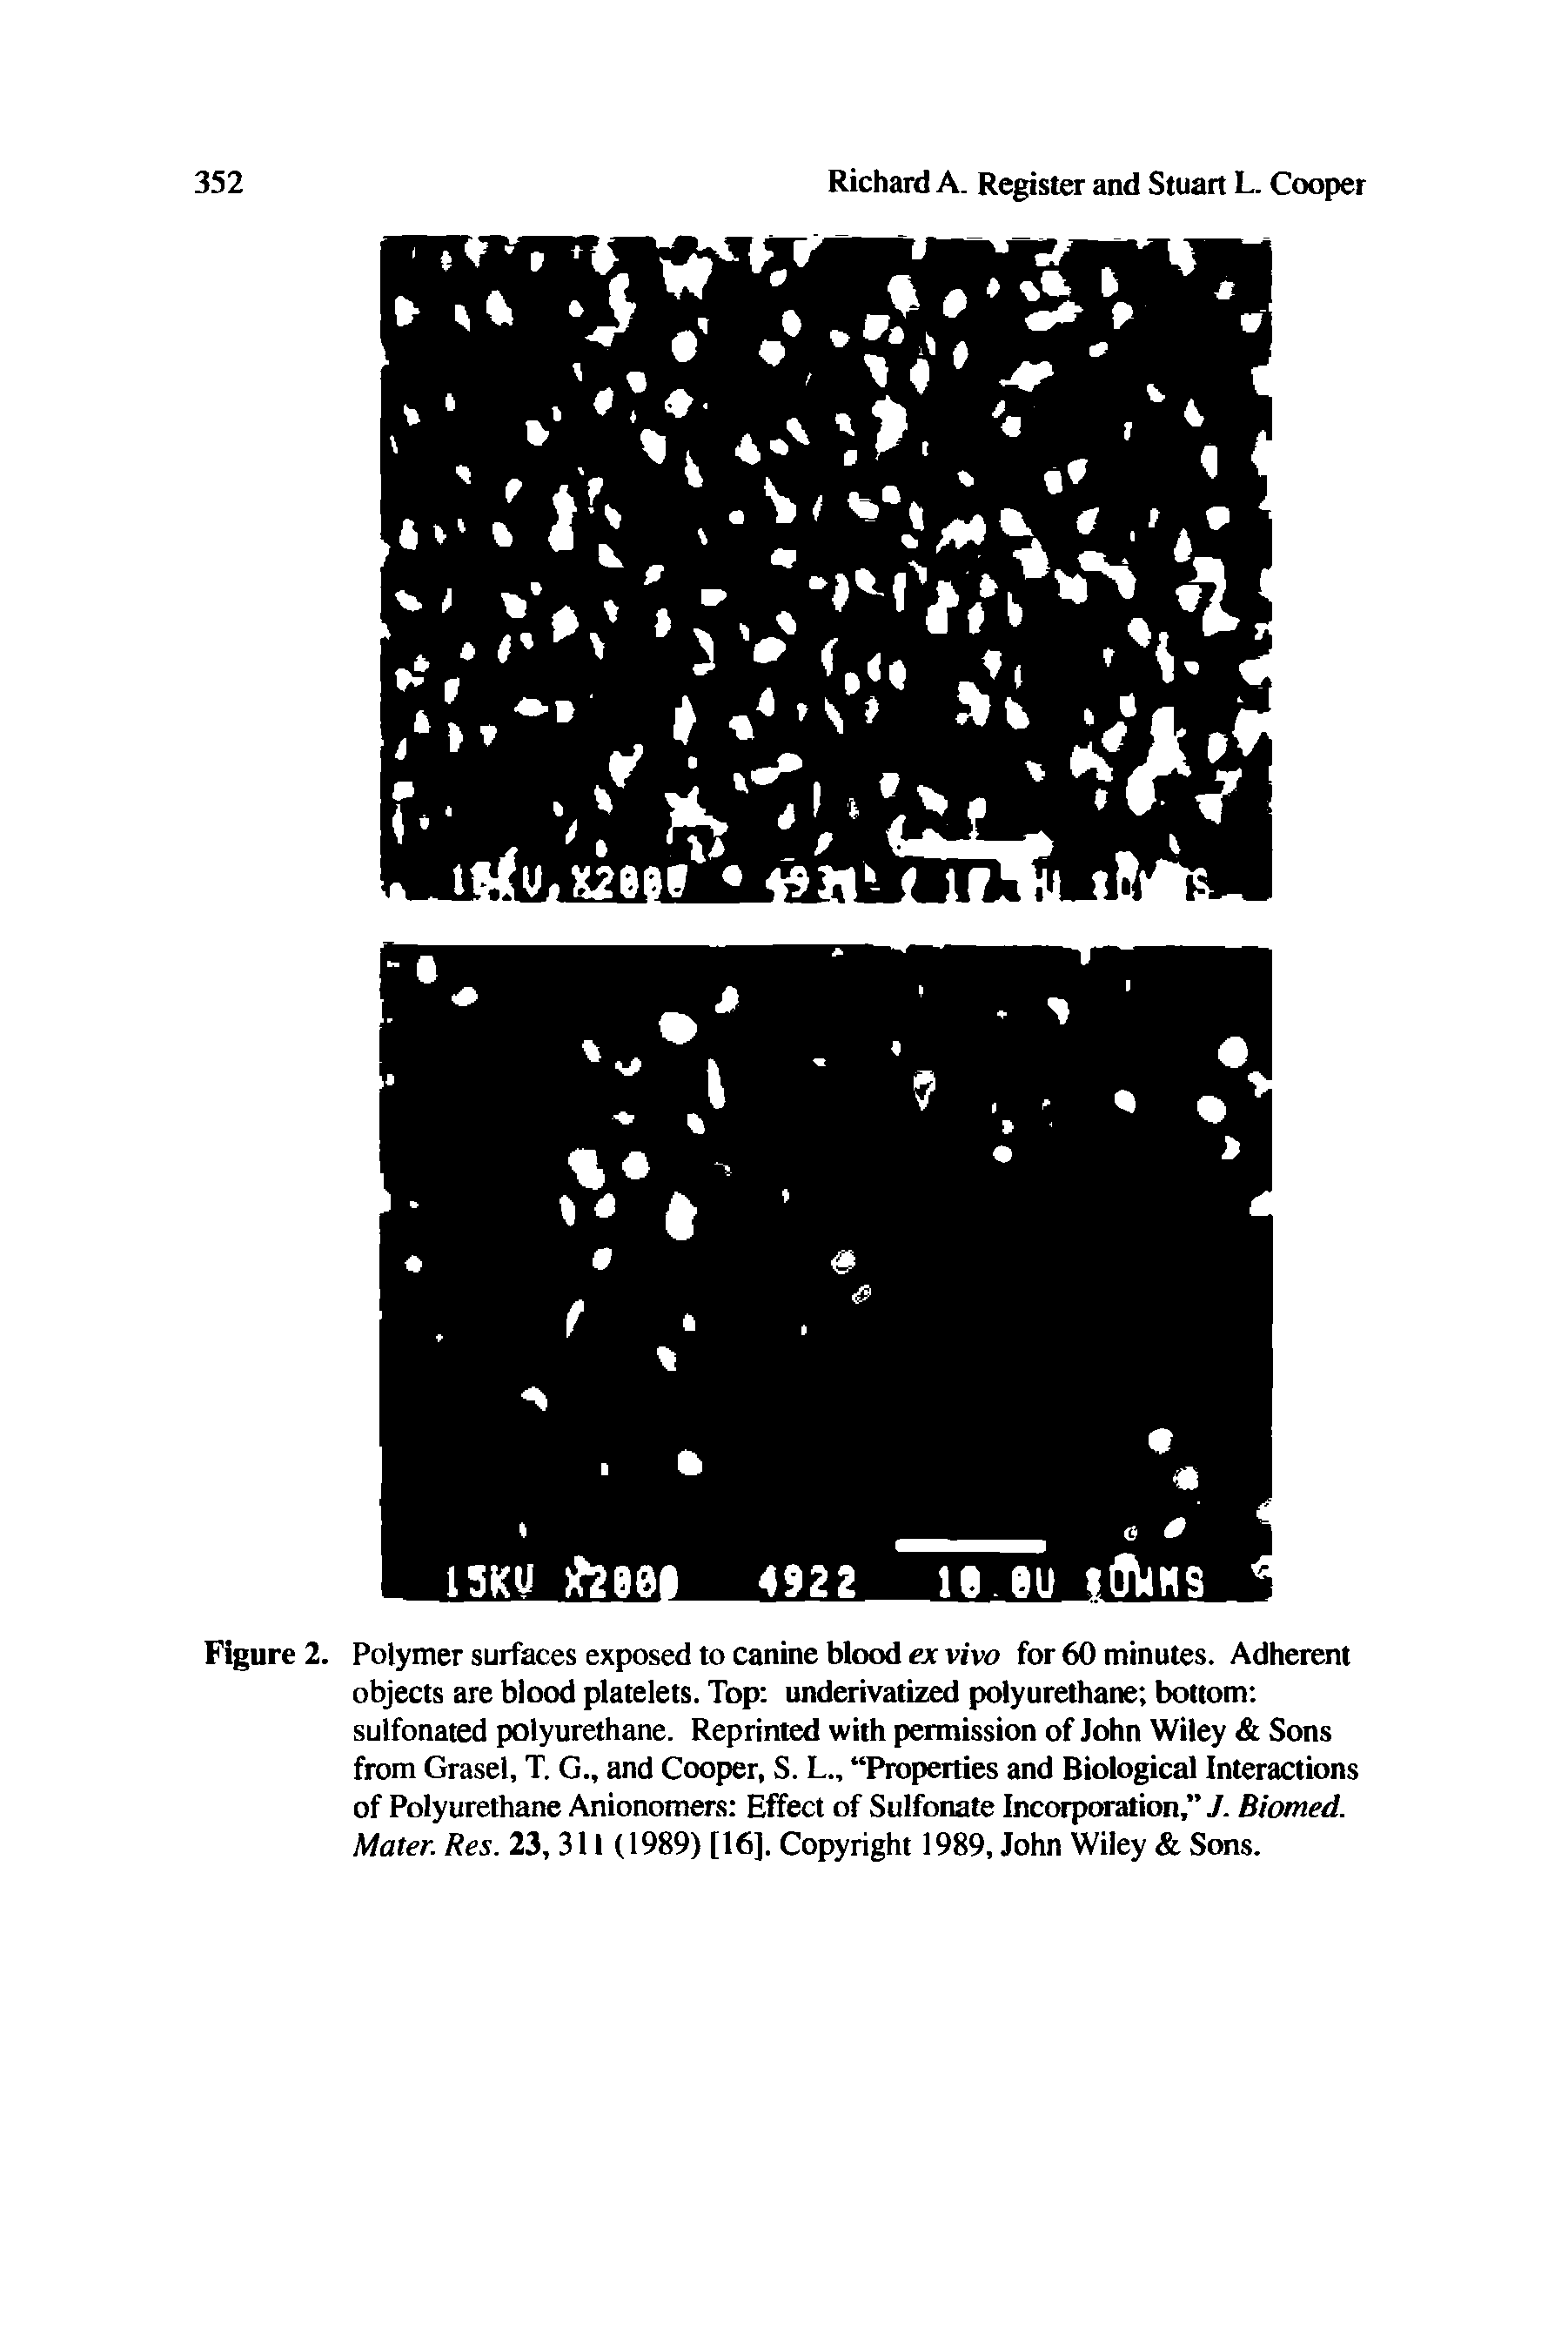 Figure 2. Polymer surfaces exposed to canine blood ex vivo for 60 minutes. Adherent objects are blood platelets. Top underivatized polyurethane bottom sulfonated polyurethane. Reprinted with permission of John Wiley Sons from Grasel, T. G., and Cooper, S. L Properties and Biological Interactions of Polyurethane Anionomers Effect of Sulfonate Incorporation, J. Biomed. Mater. Res. 23, 311 (1989) [16], Copyright 1989, John Wiley Sons.